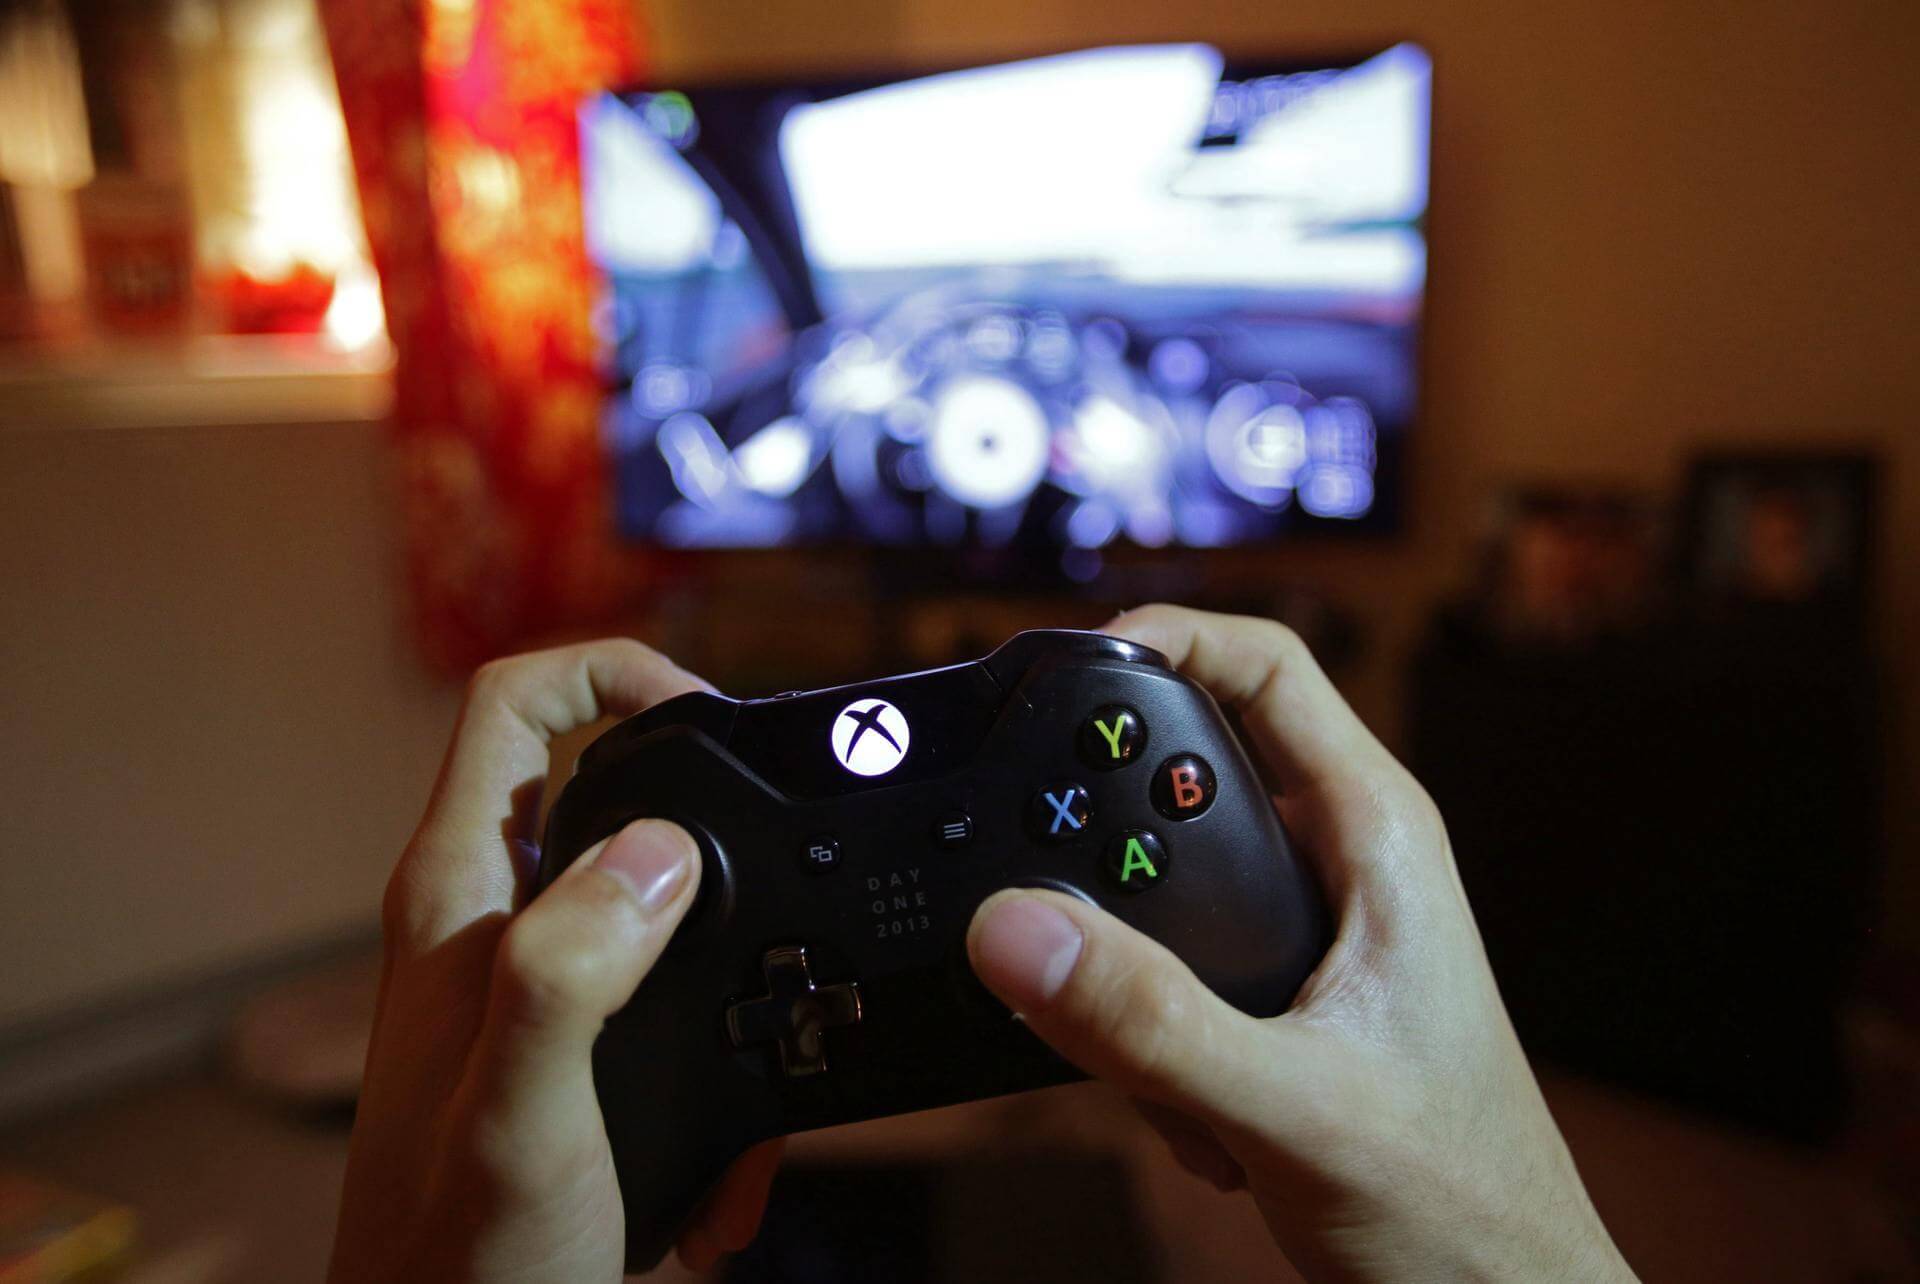 Xbox One users found their consoles temporarily bricked this morning